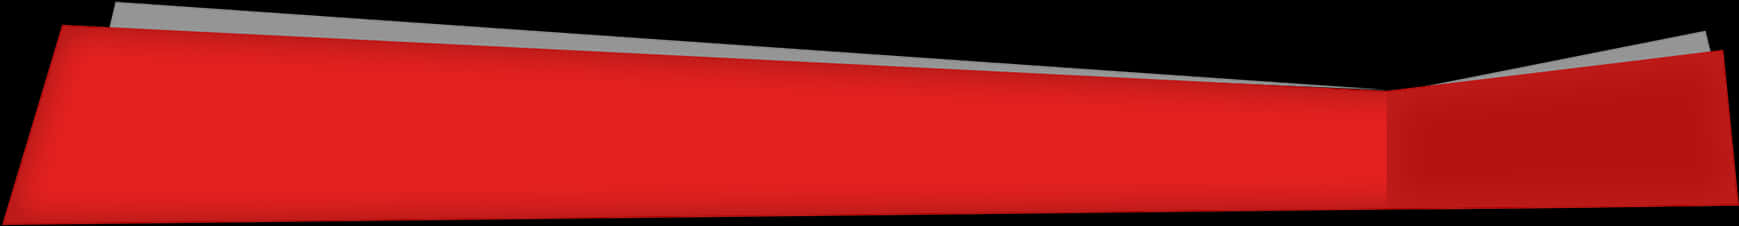 Redand Black Lower Third Graphic PNG image